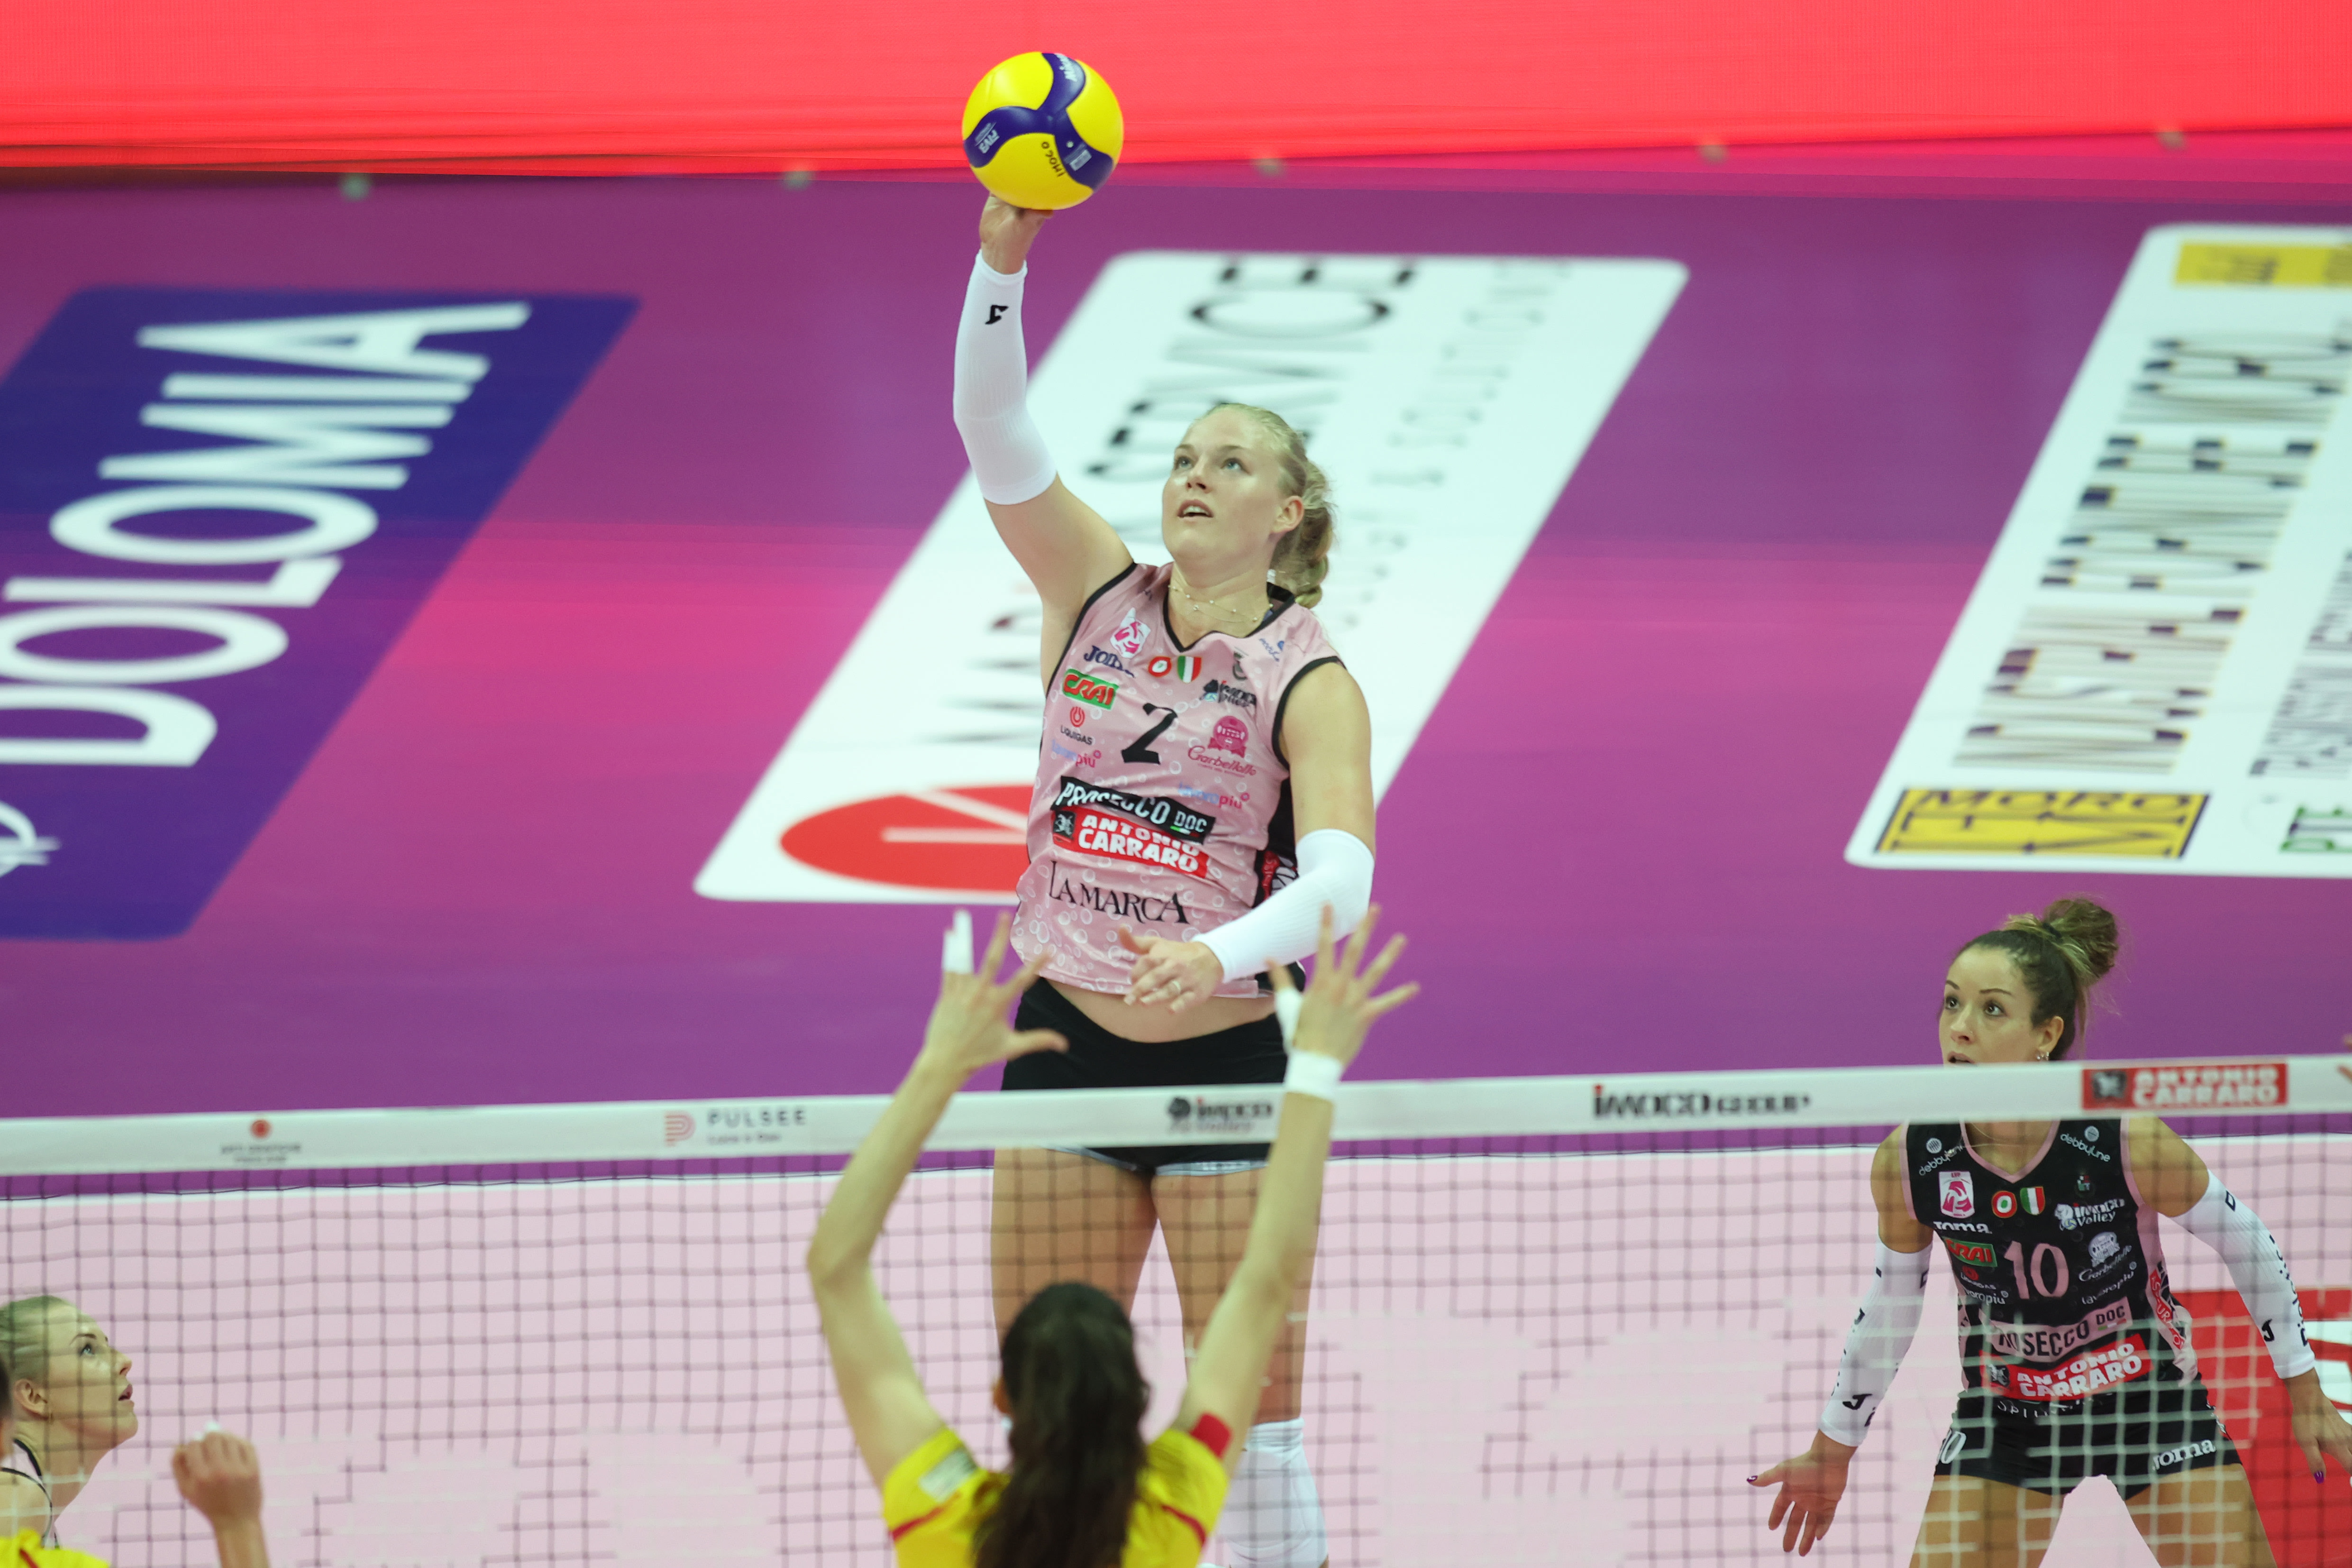 Plummers golden opportunity with reloaded Conegliano volleyballworld